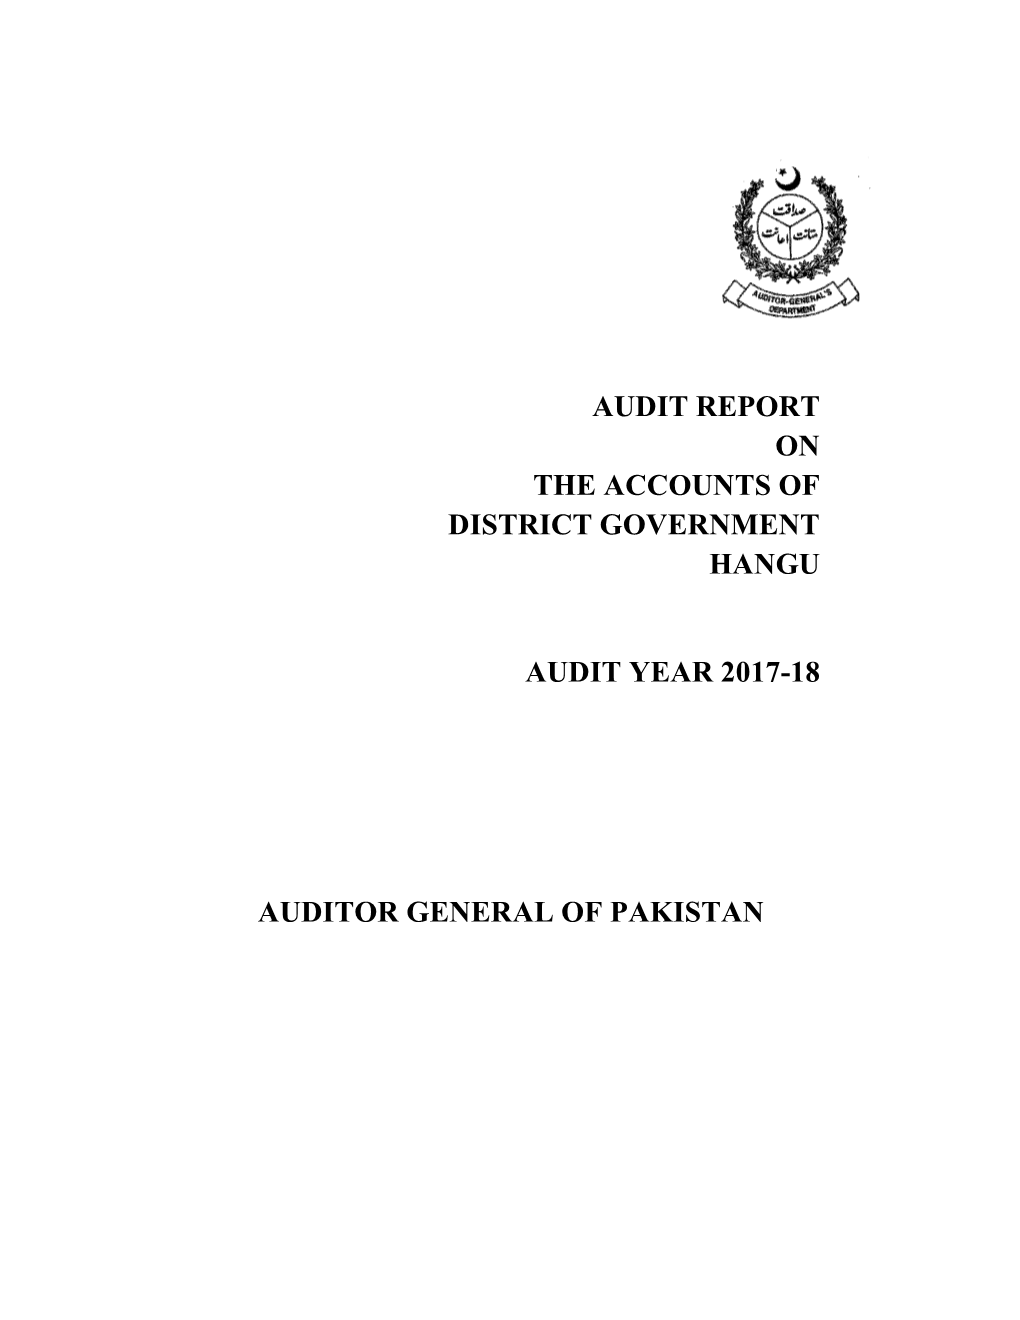 Audit Report on the Accounts of District Government Hangu